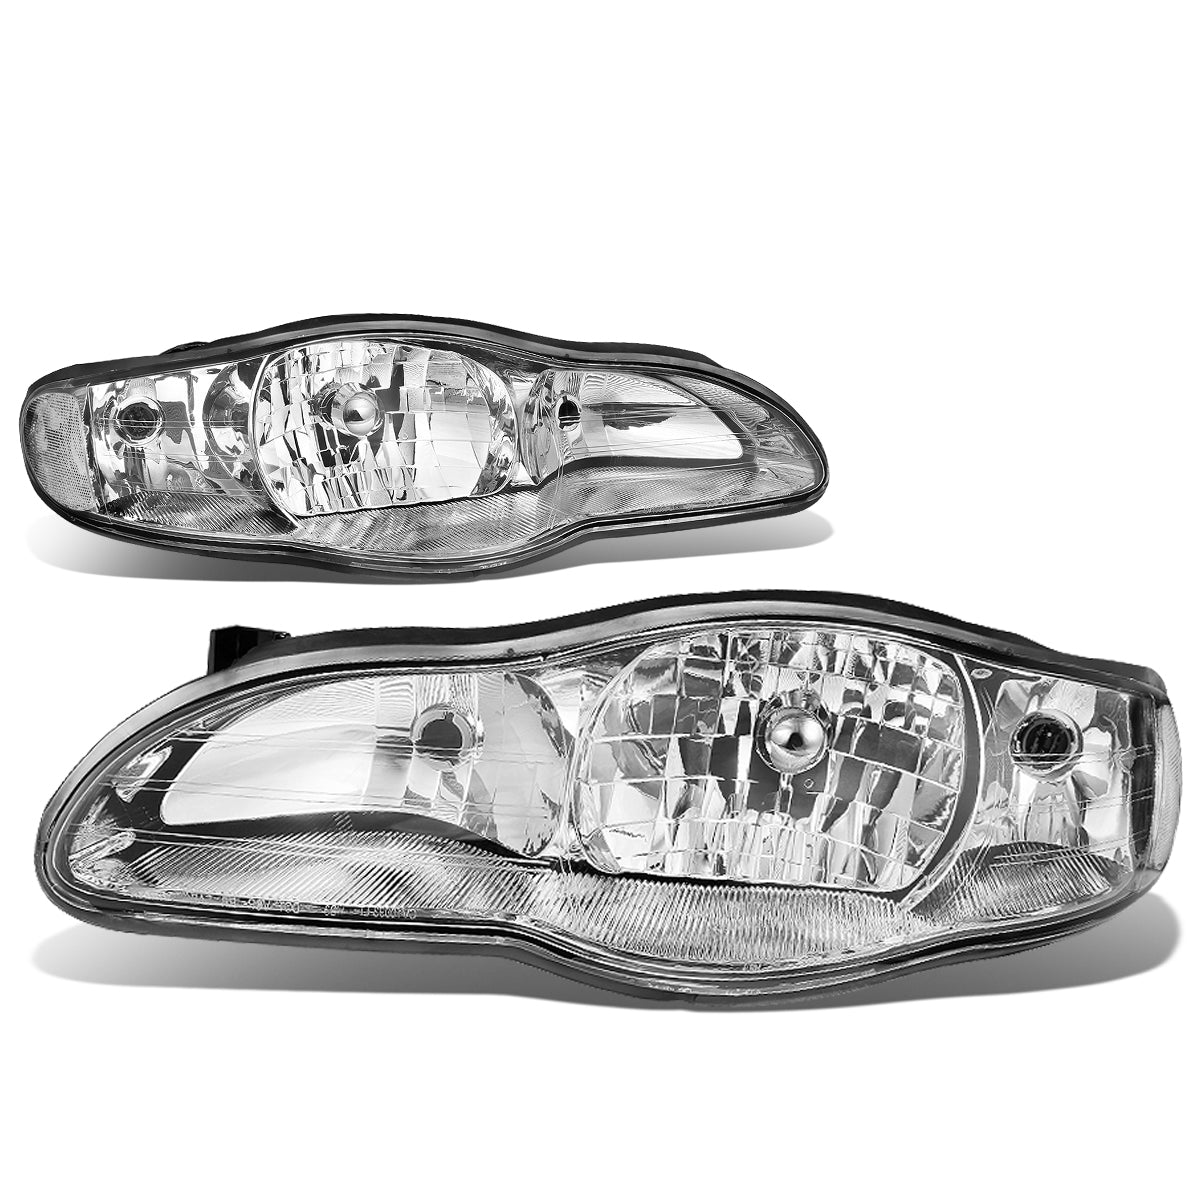 Factory Style Headlights<br>00-05 Chevy Monte Carlo